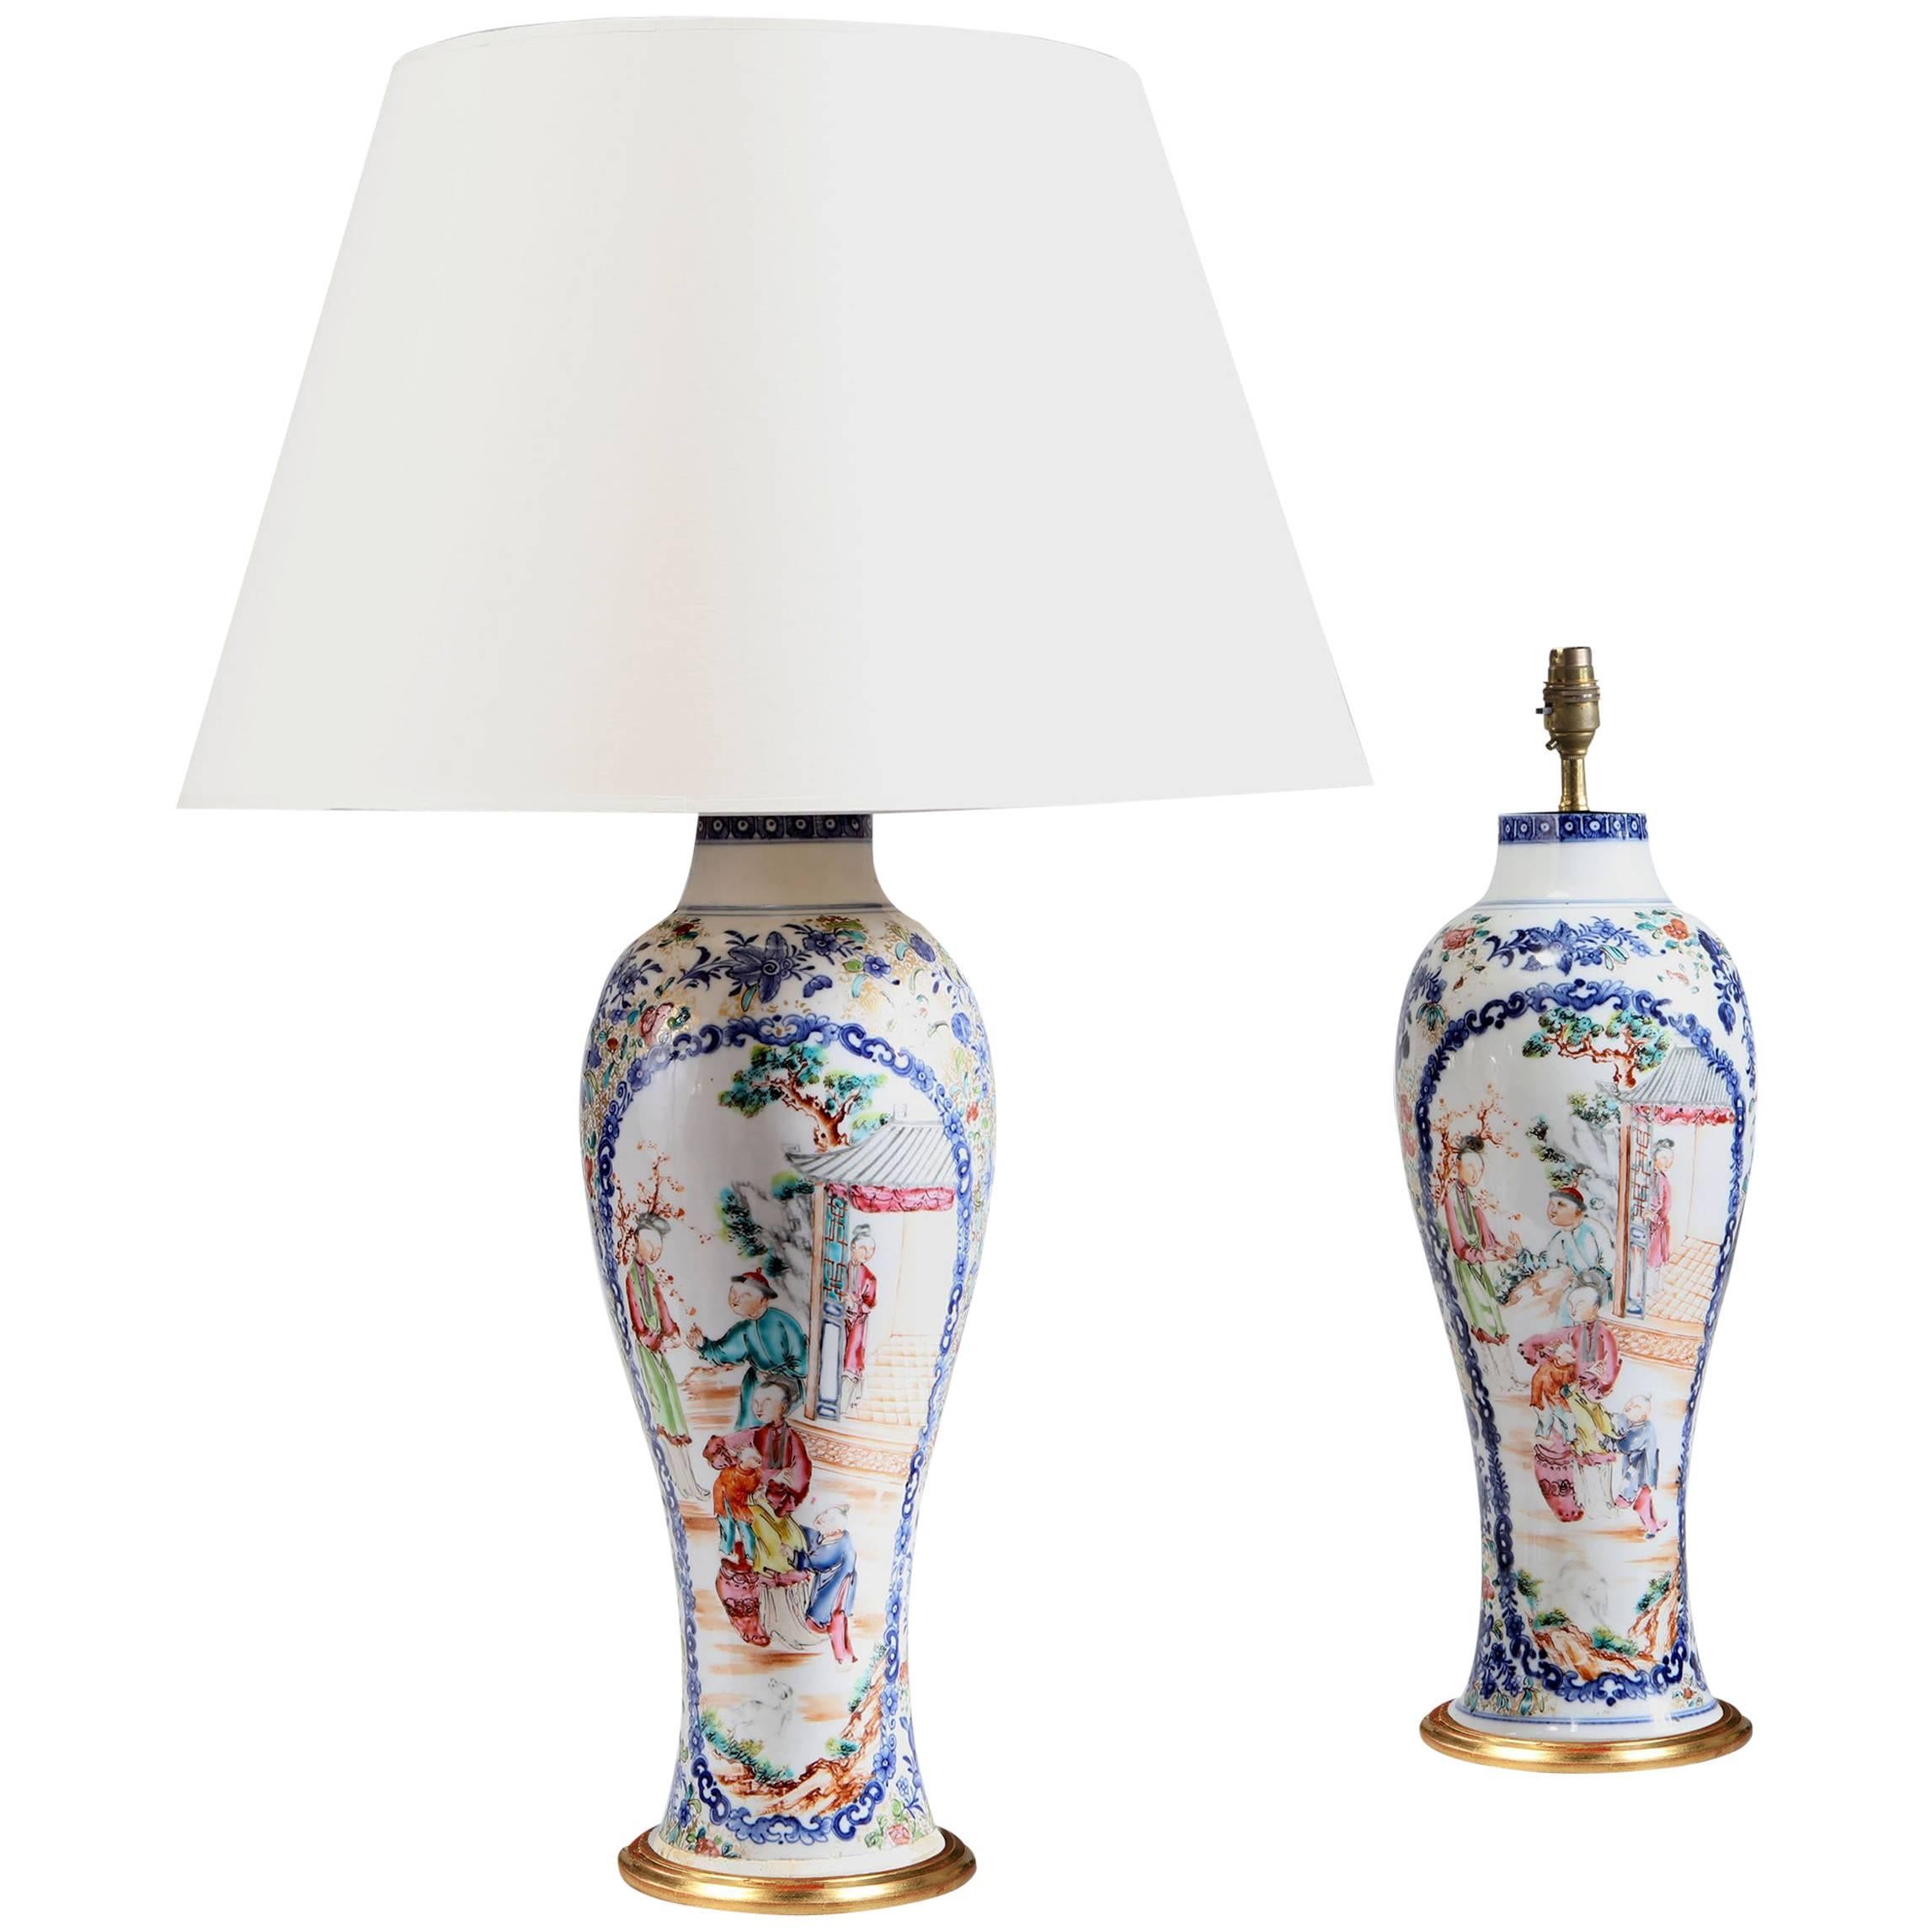 A Pair of 18th Century Chinese Porcelain Vases as Table Lamps with Gilt Bases